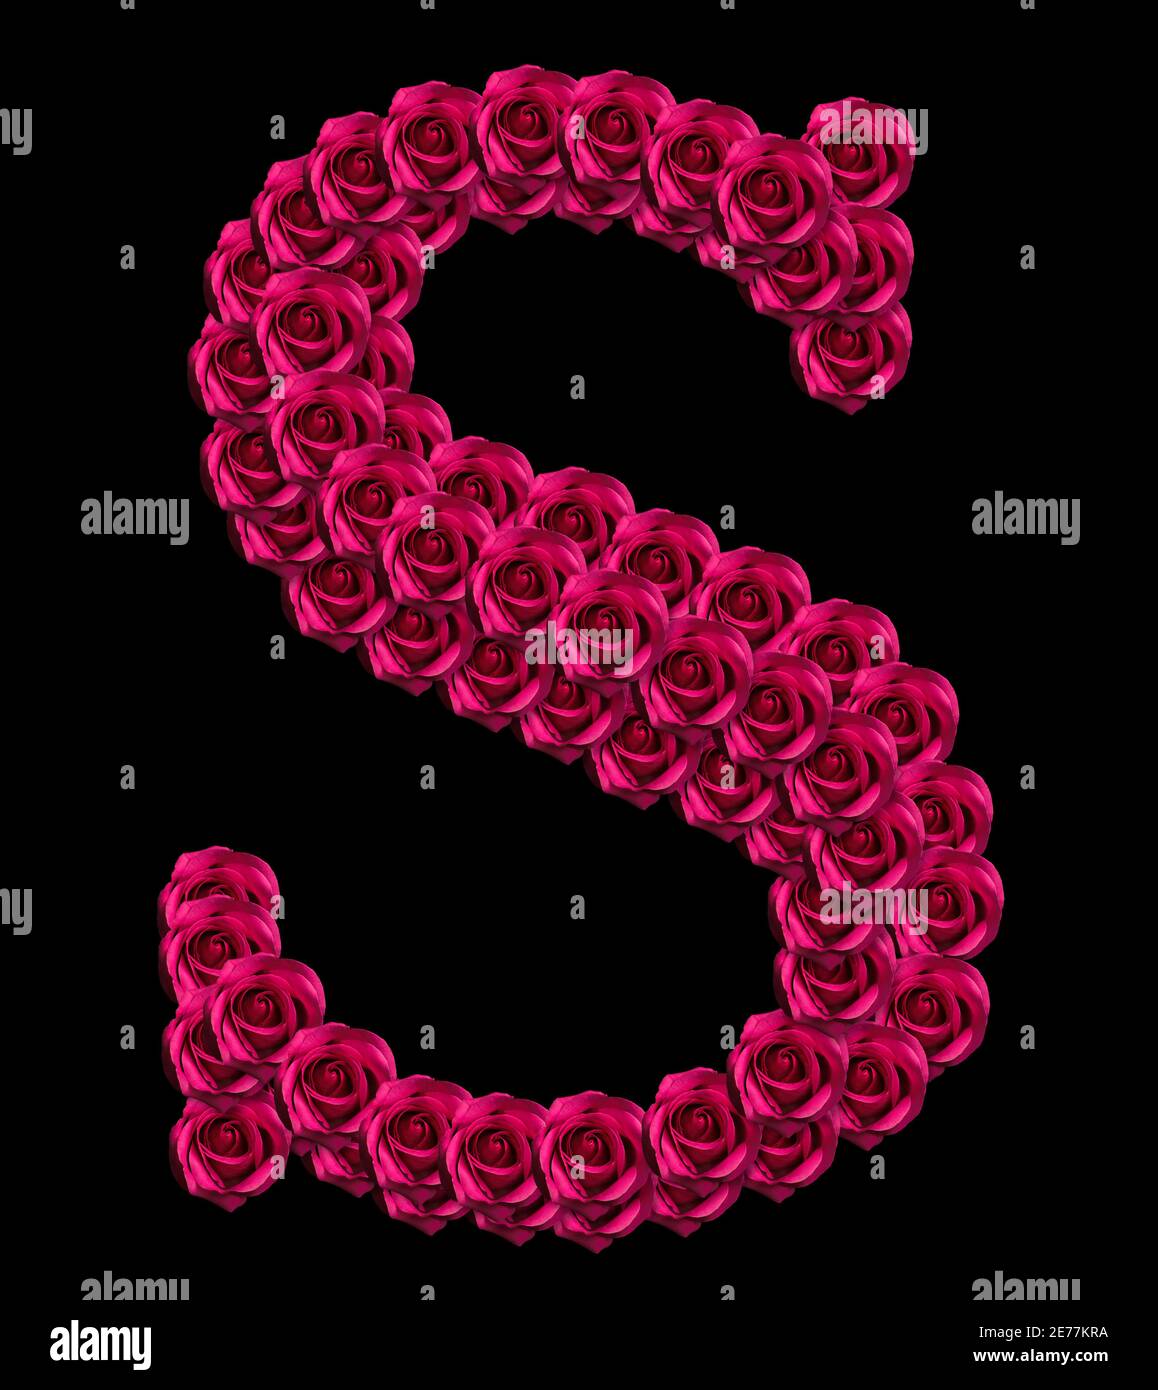 romantic concept image of a capital letter S made of red roses. Isolated on black background. Design element for love or valentines themes Stock Photo